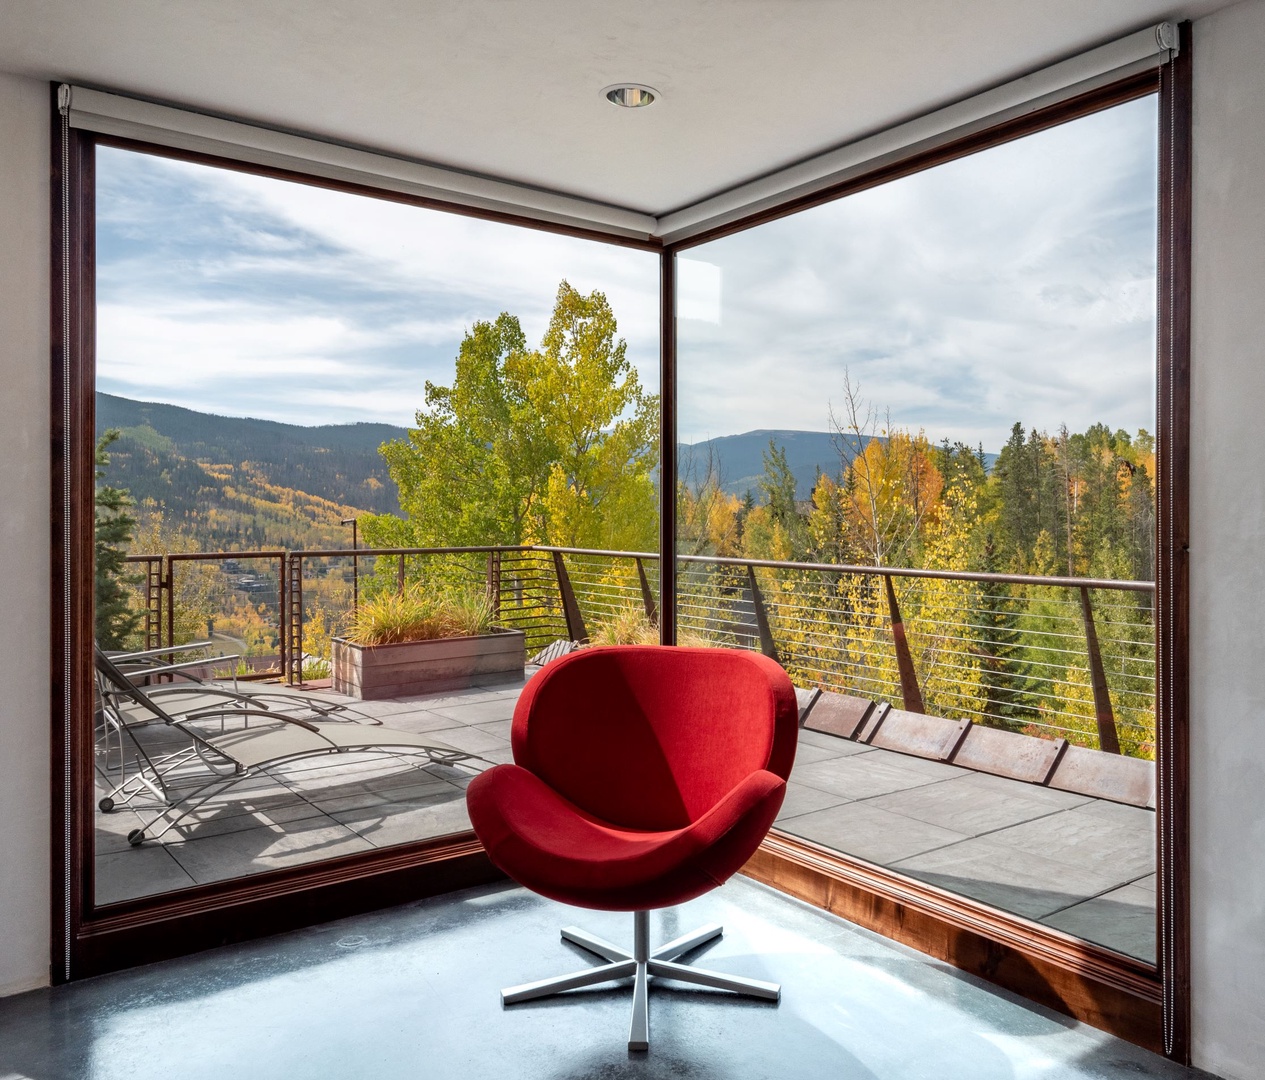 Take in the view or relax with a book in the lounge area